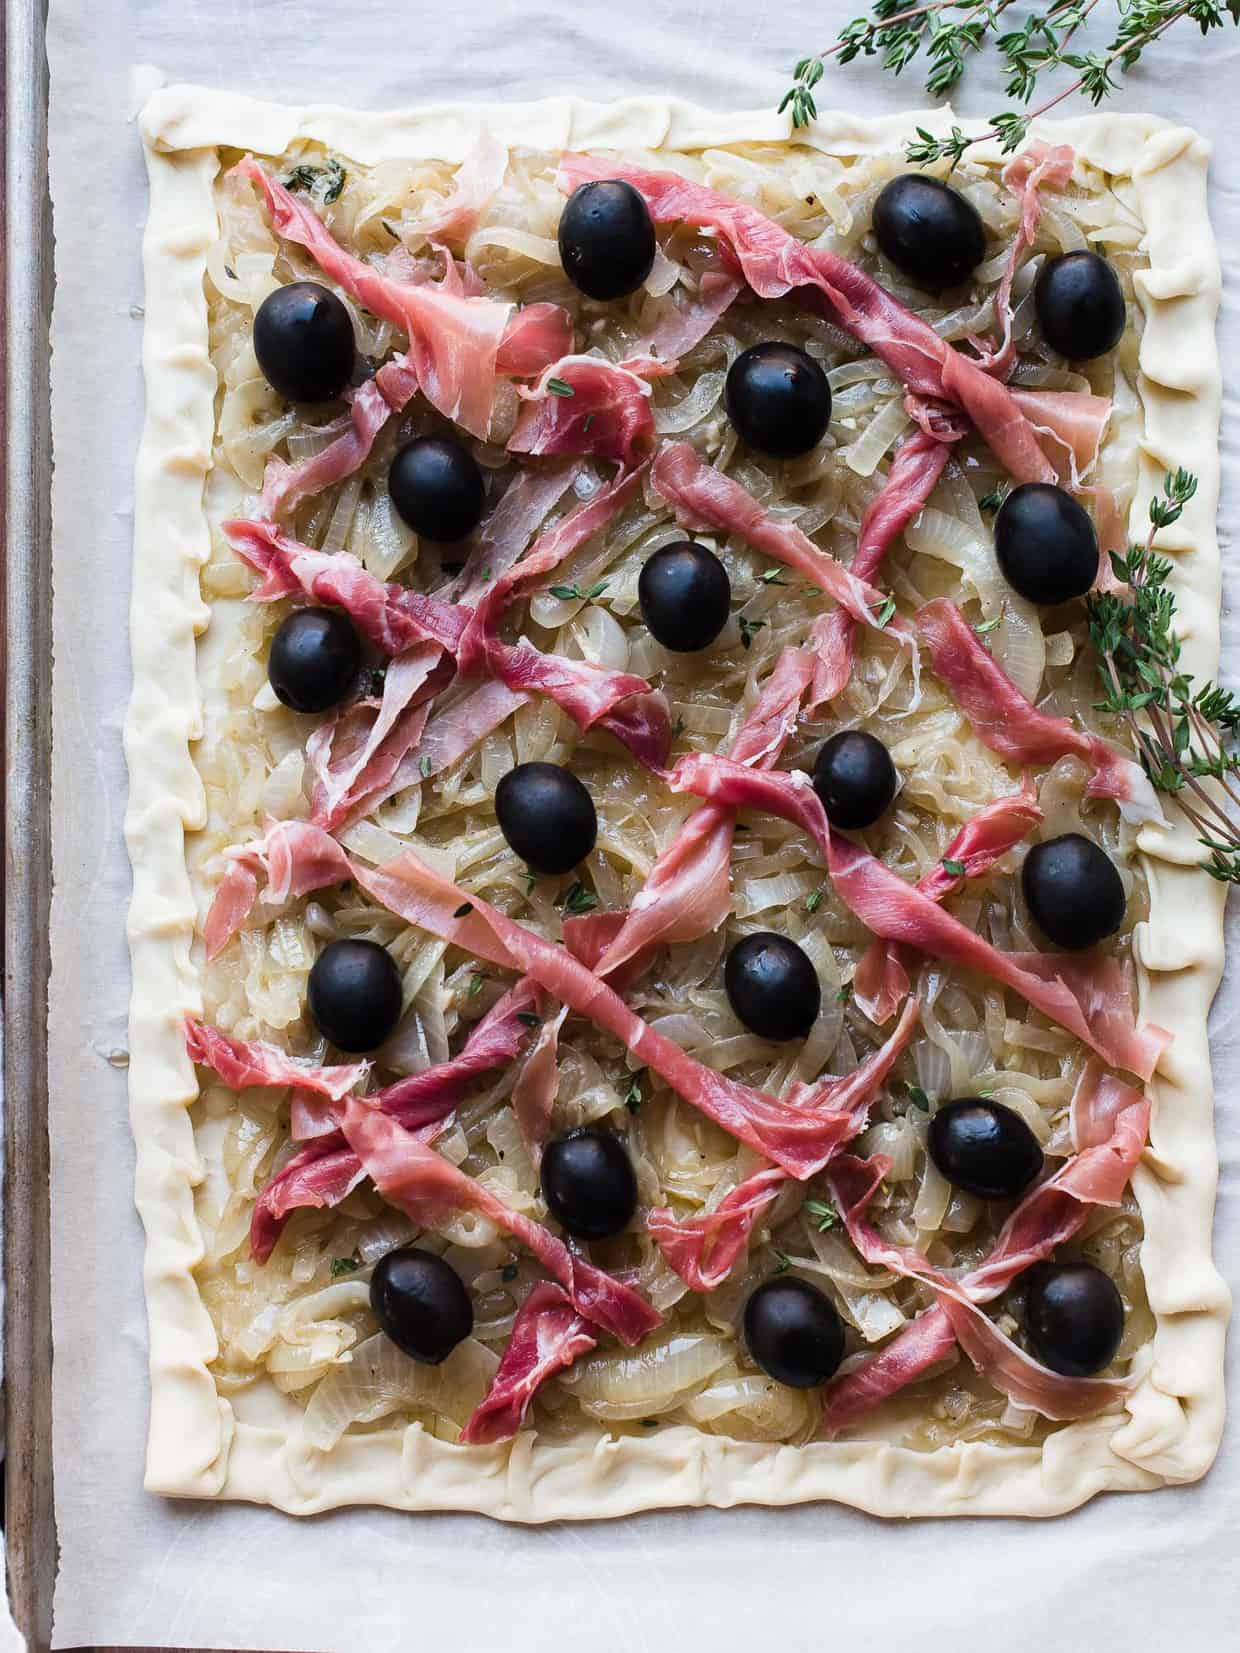 Pissaladière with Prosciutto ready to go into the oven.